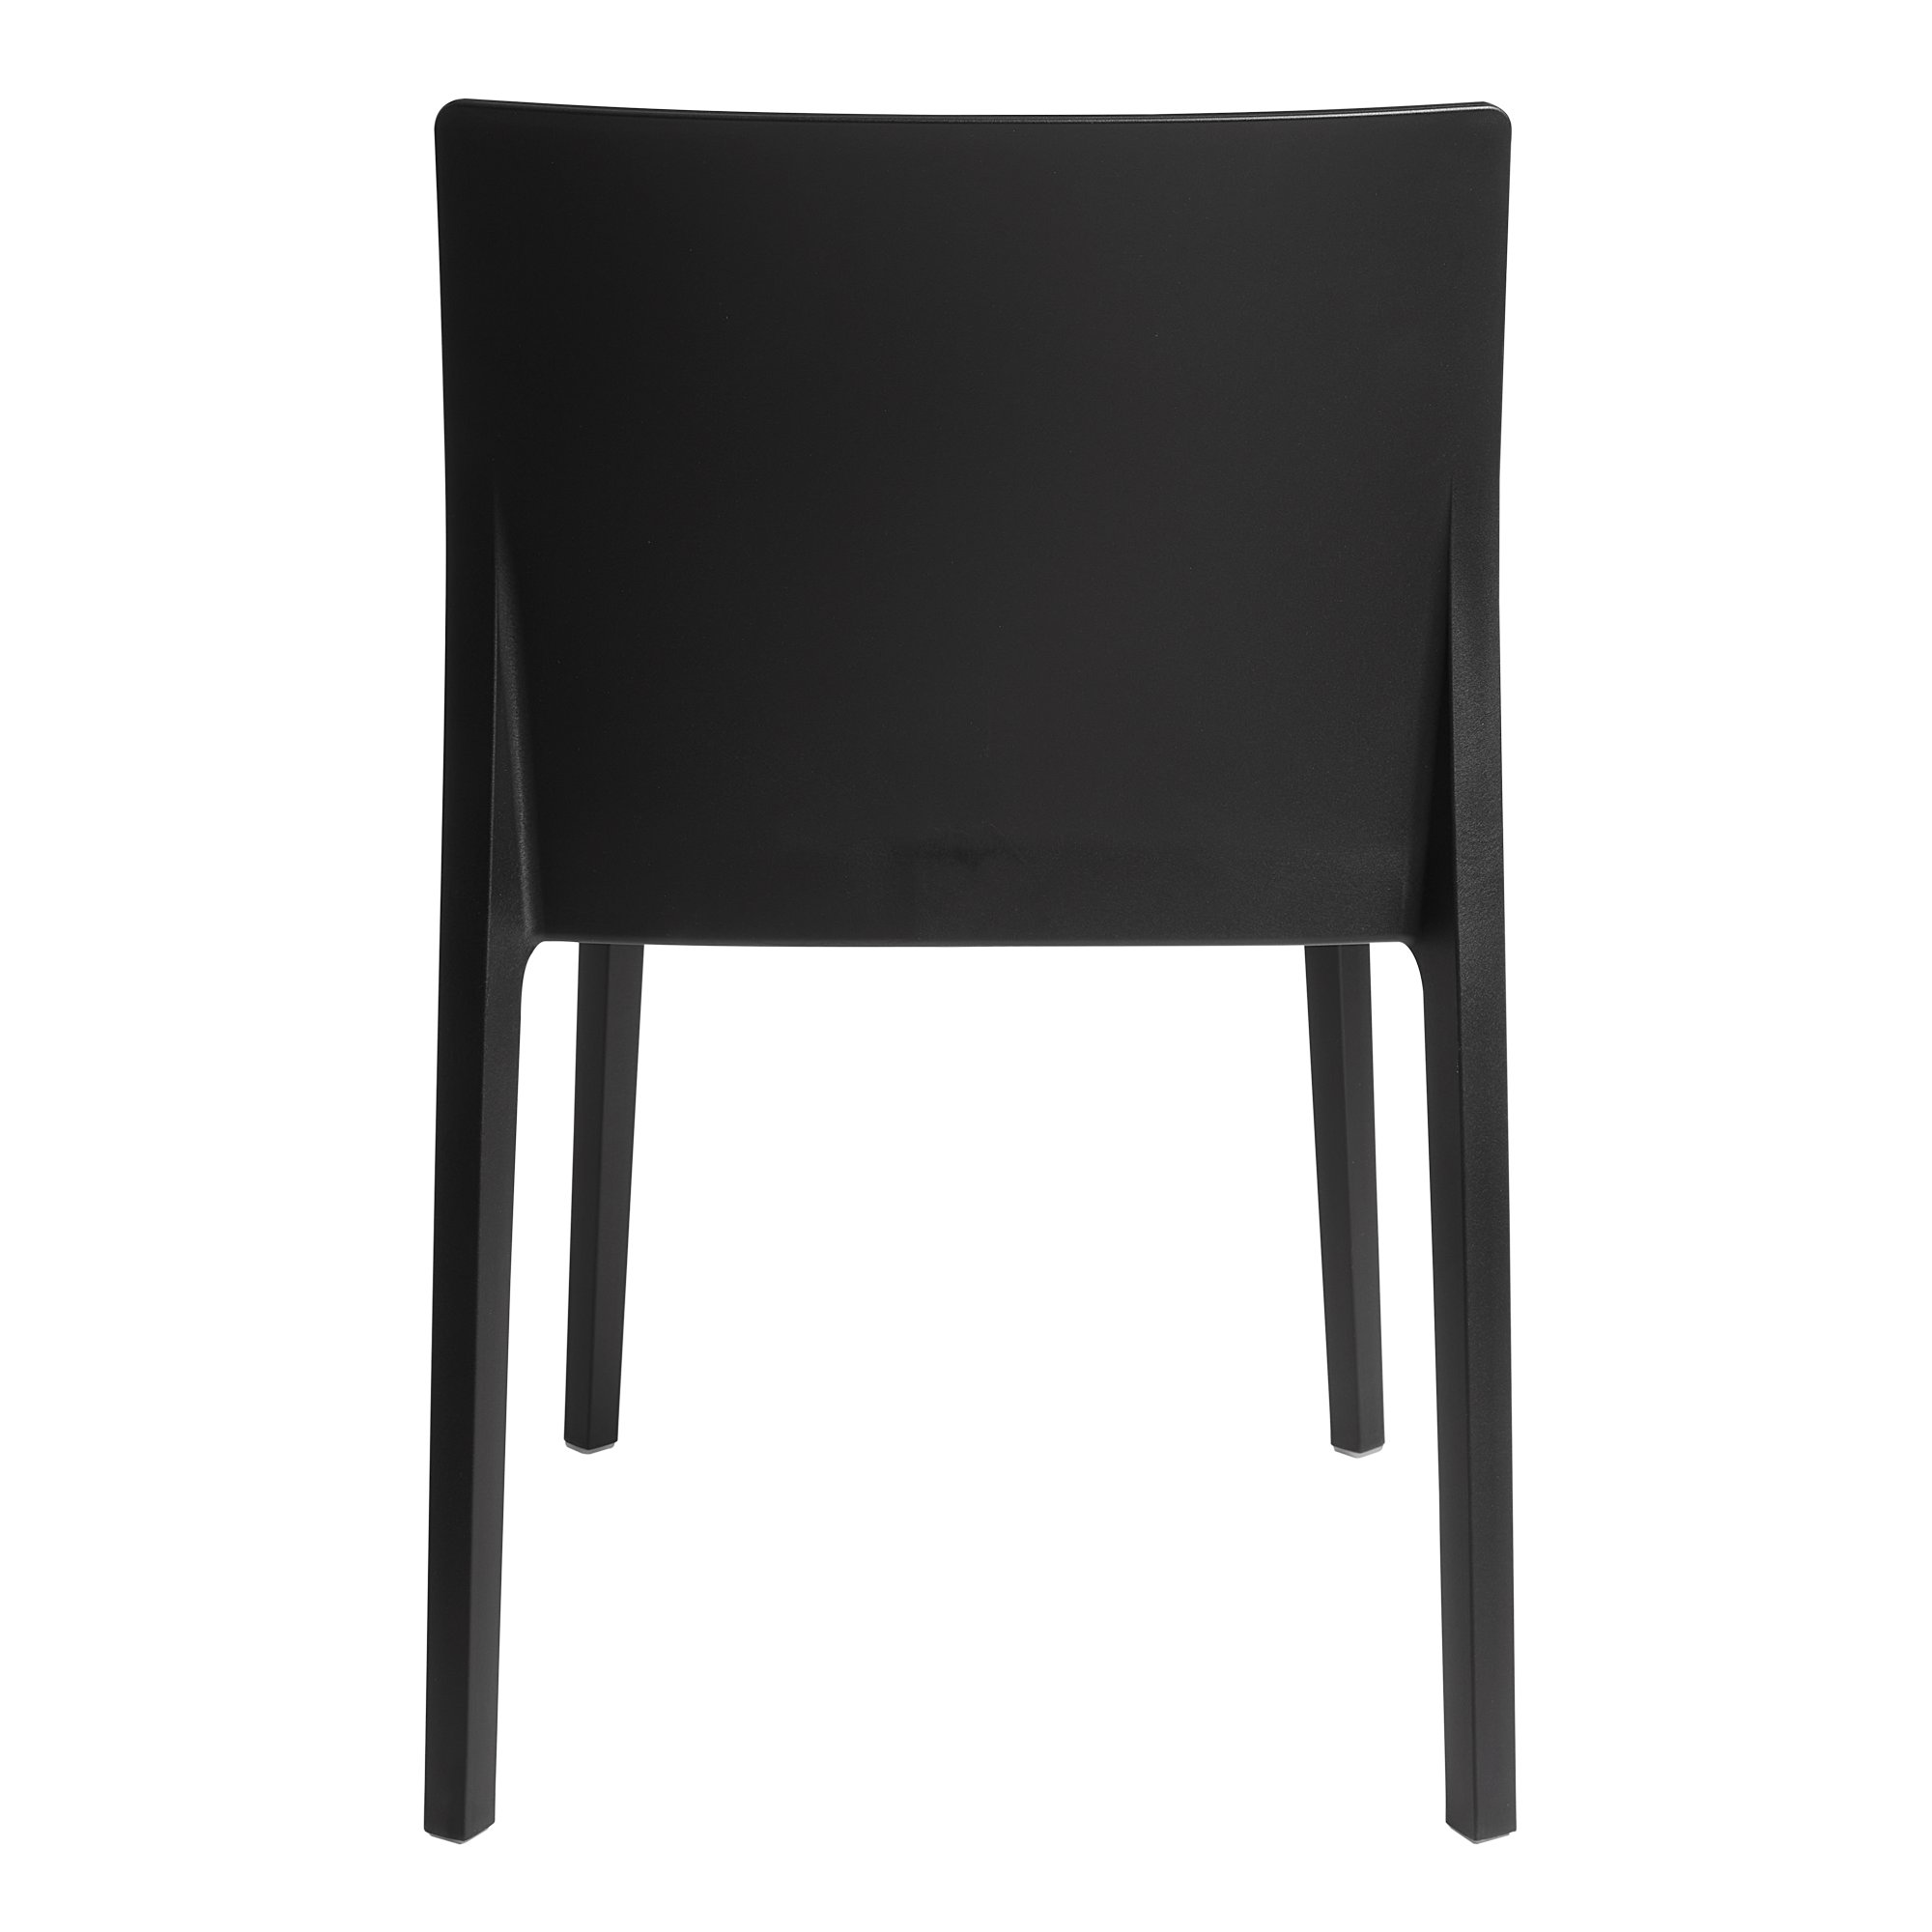 Black Ayrton Stackable Chair for Indoor and Outdoor Use - Back View